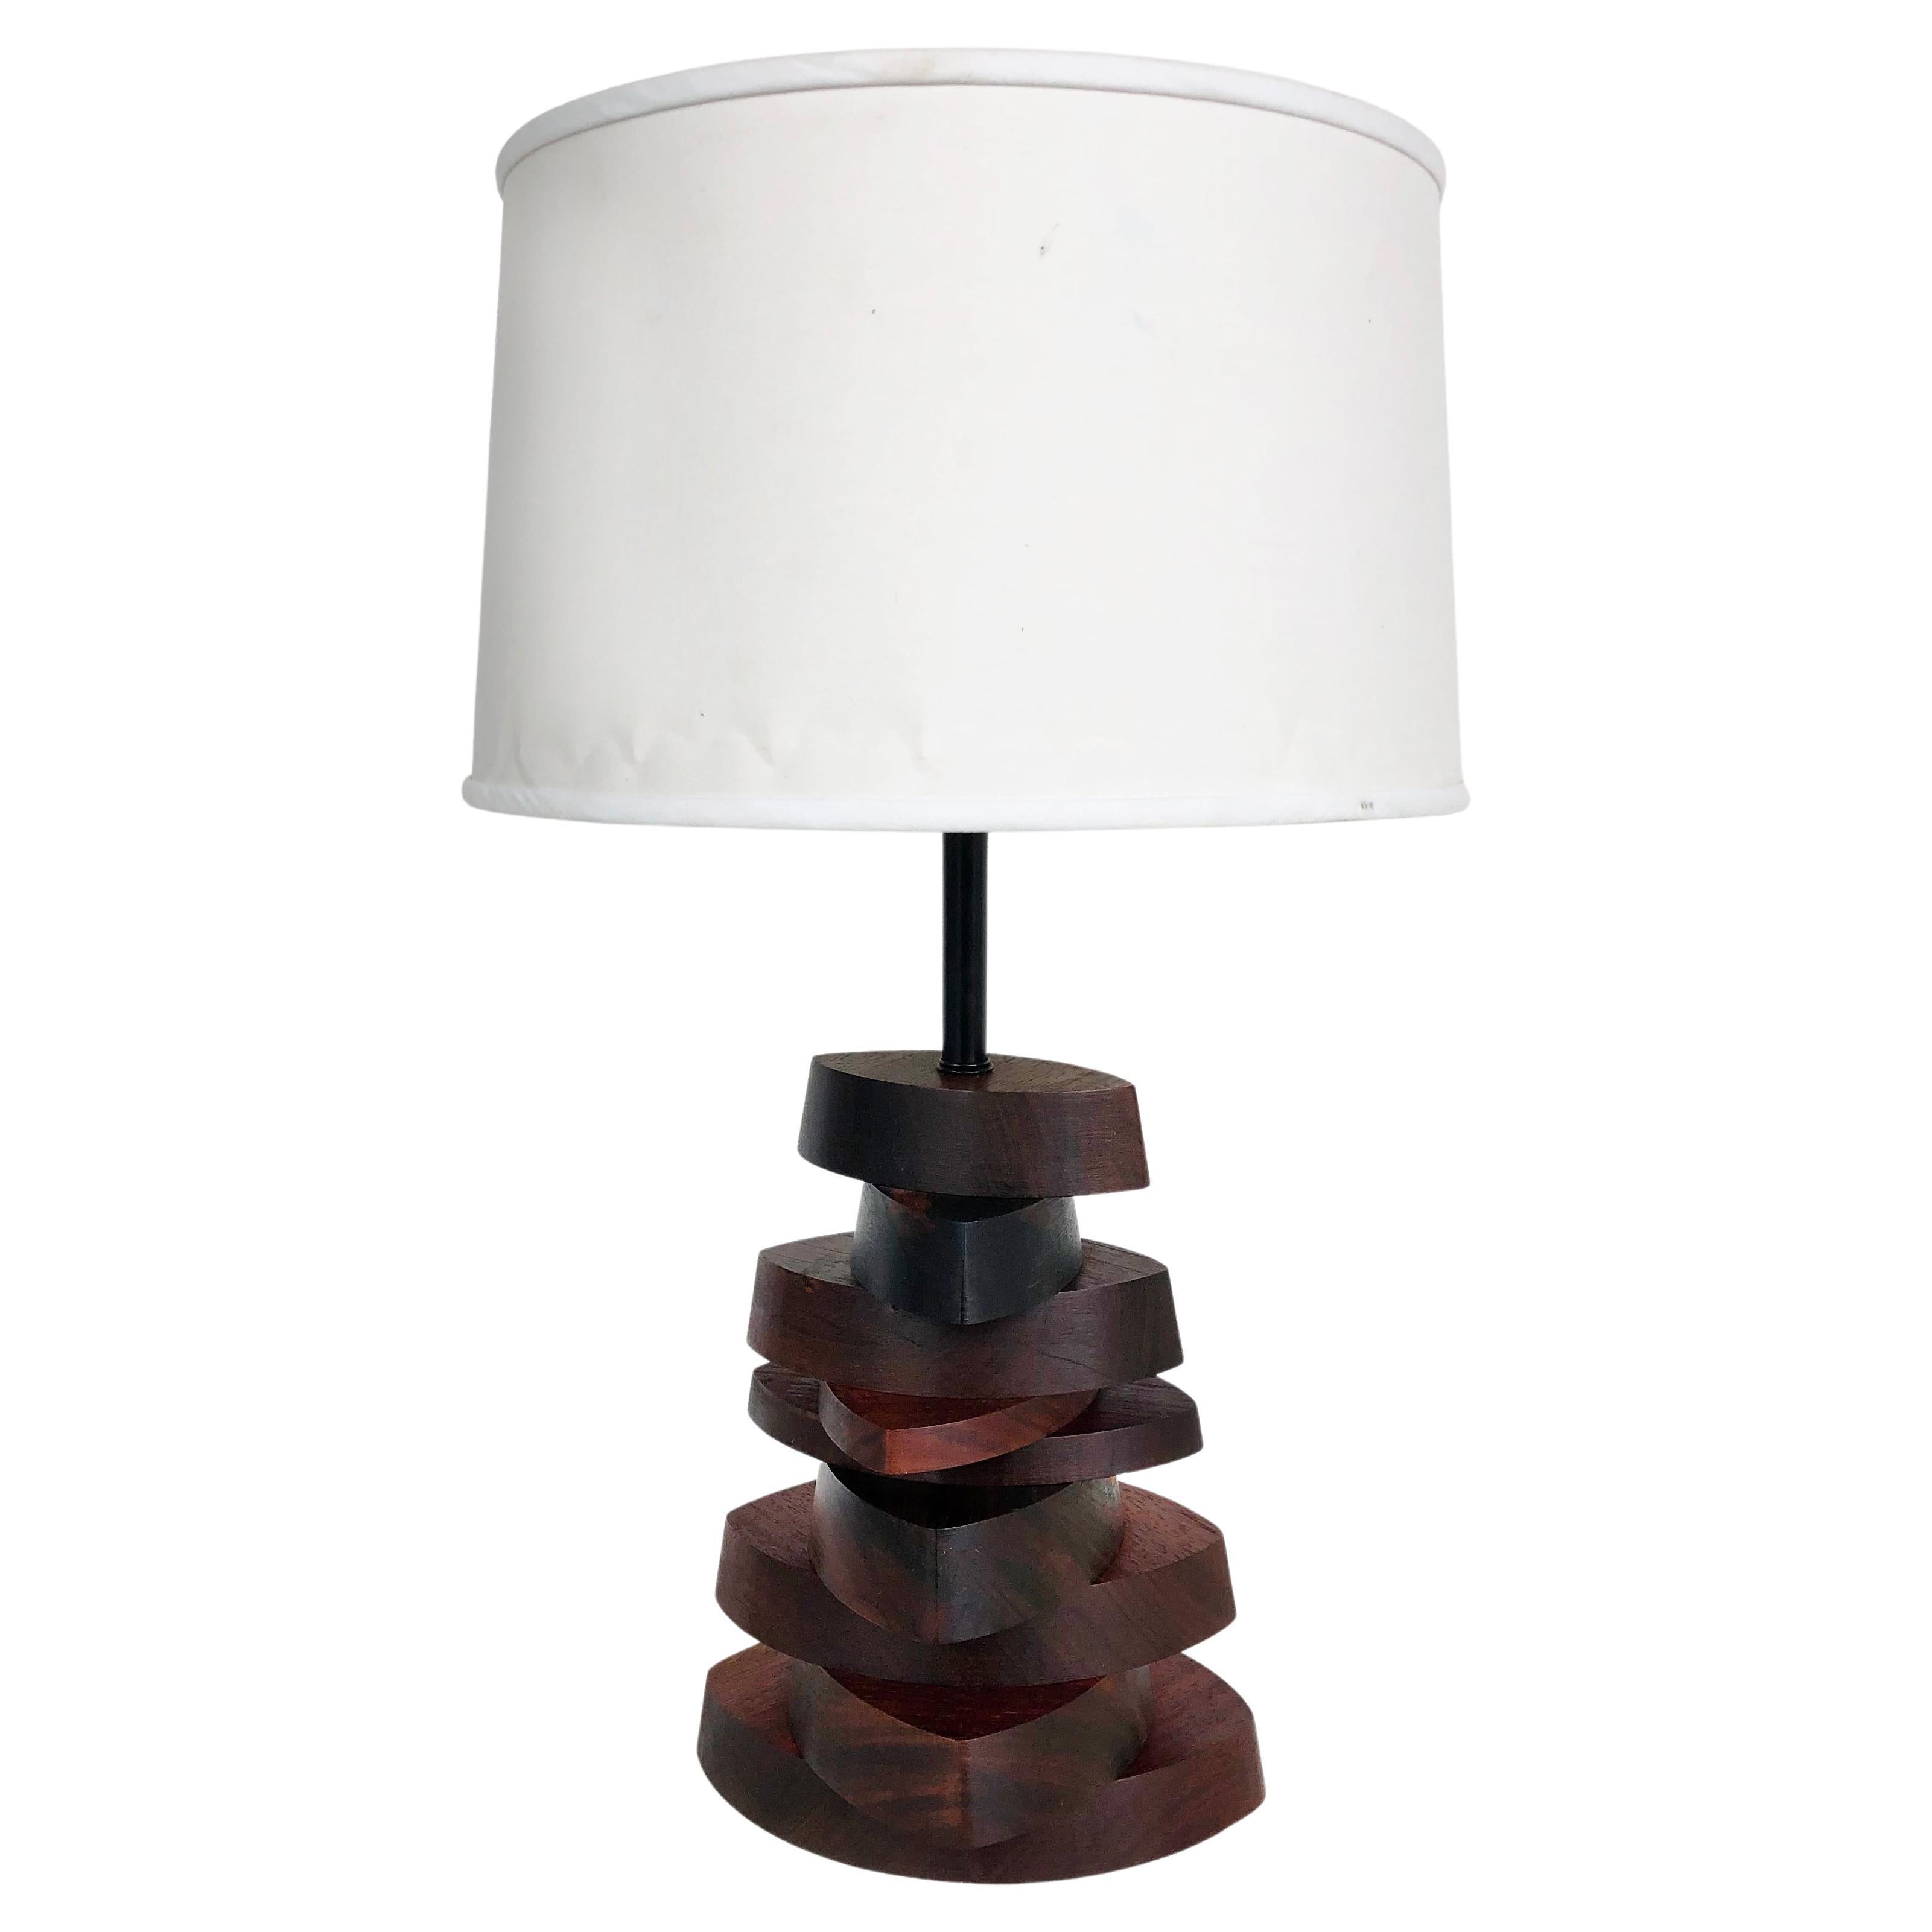 American Studio Mechanical Wood Specimen Table Lamp, Mid-Late 20th Century For Sale